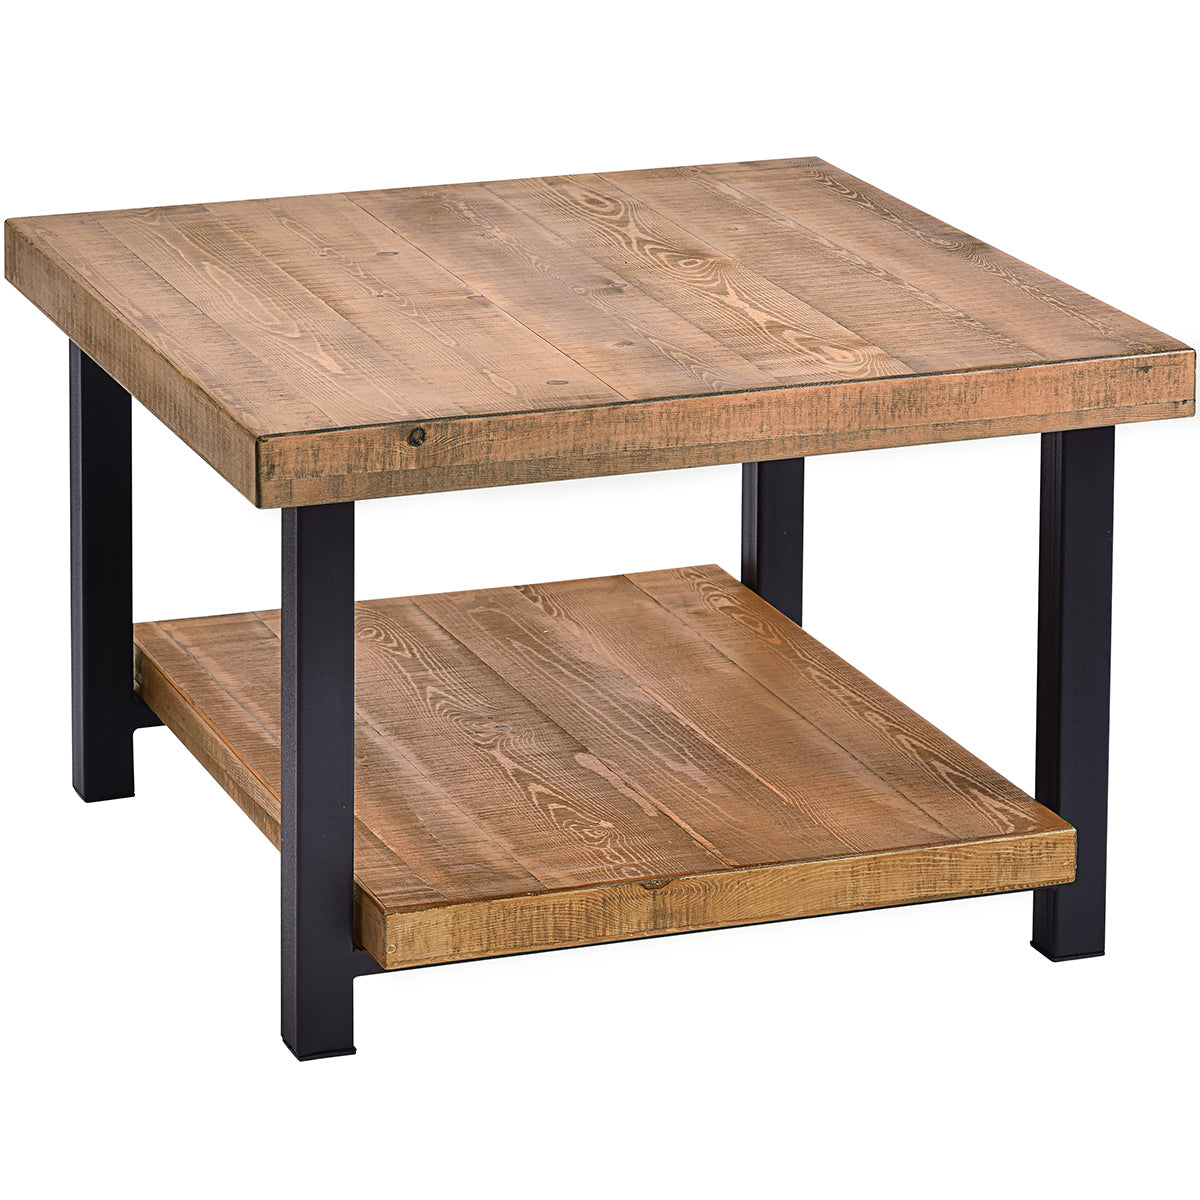 TREXM Rustic Natural Coffee Table with Storage Shelf for Living Room, Easy Assembly (26"x26")